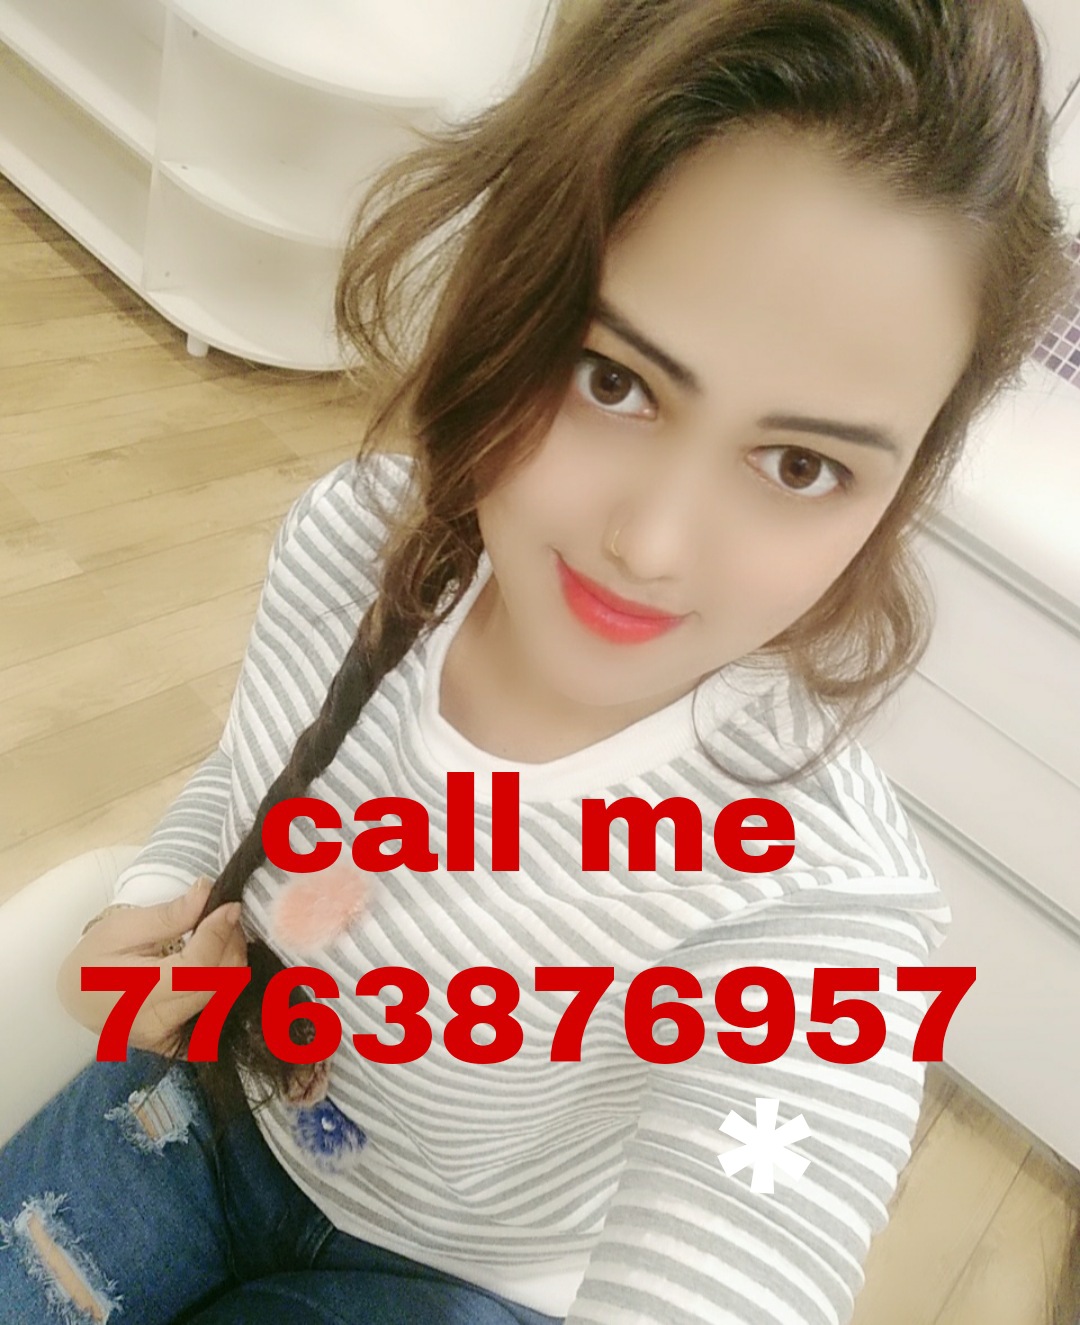 AMBIKAPUR CALL GIRL LOW PRICE CASH PAYMENT SERVICE  HOURS AVAILABLE 